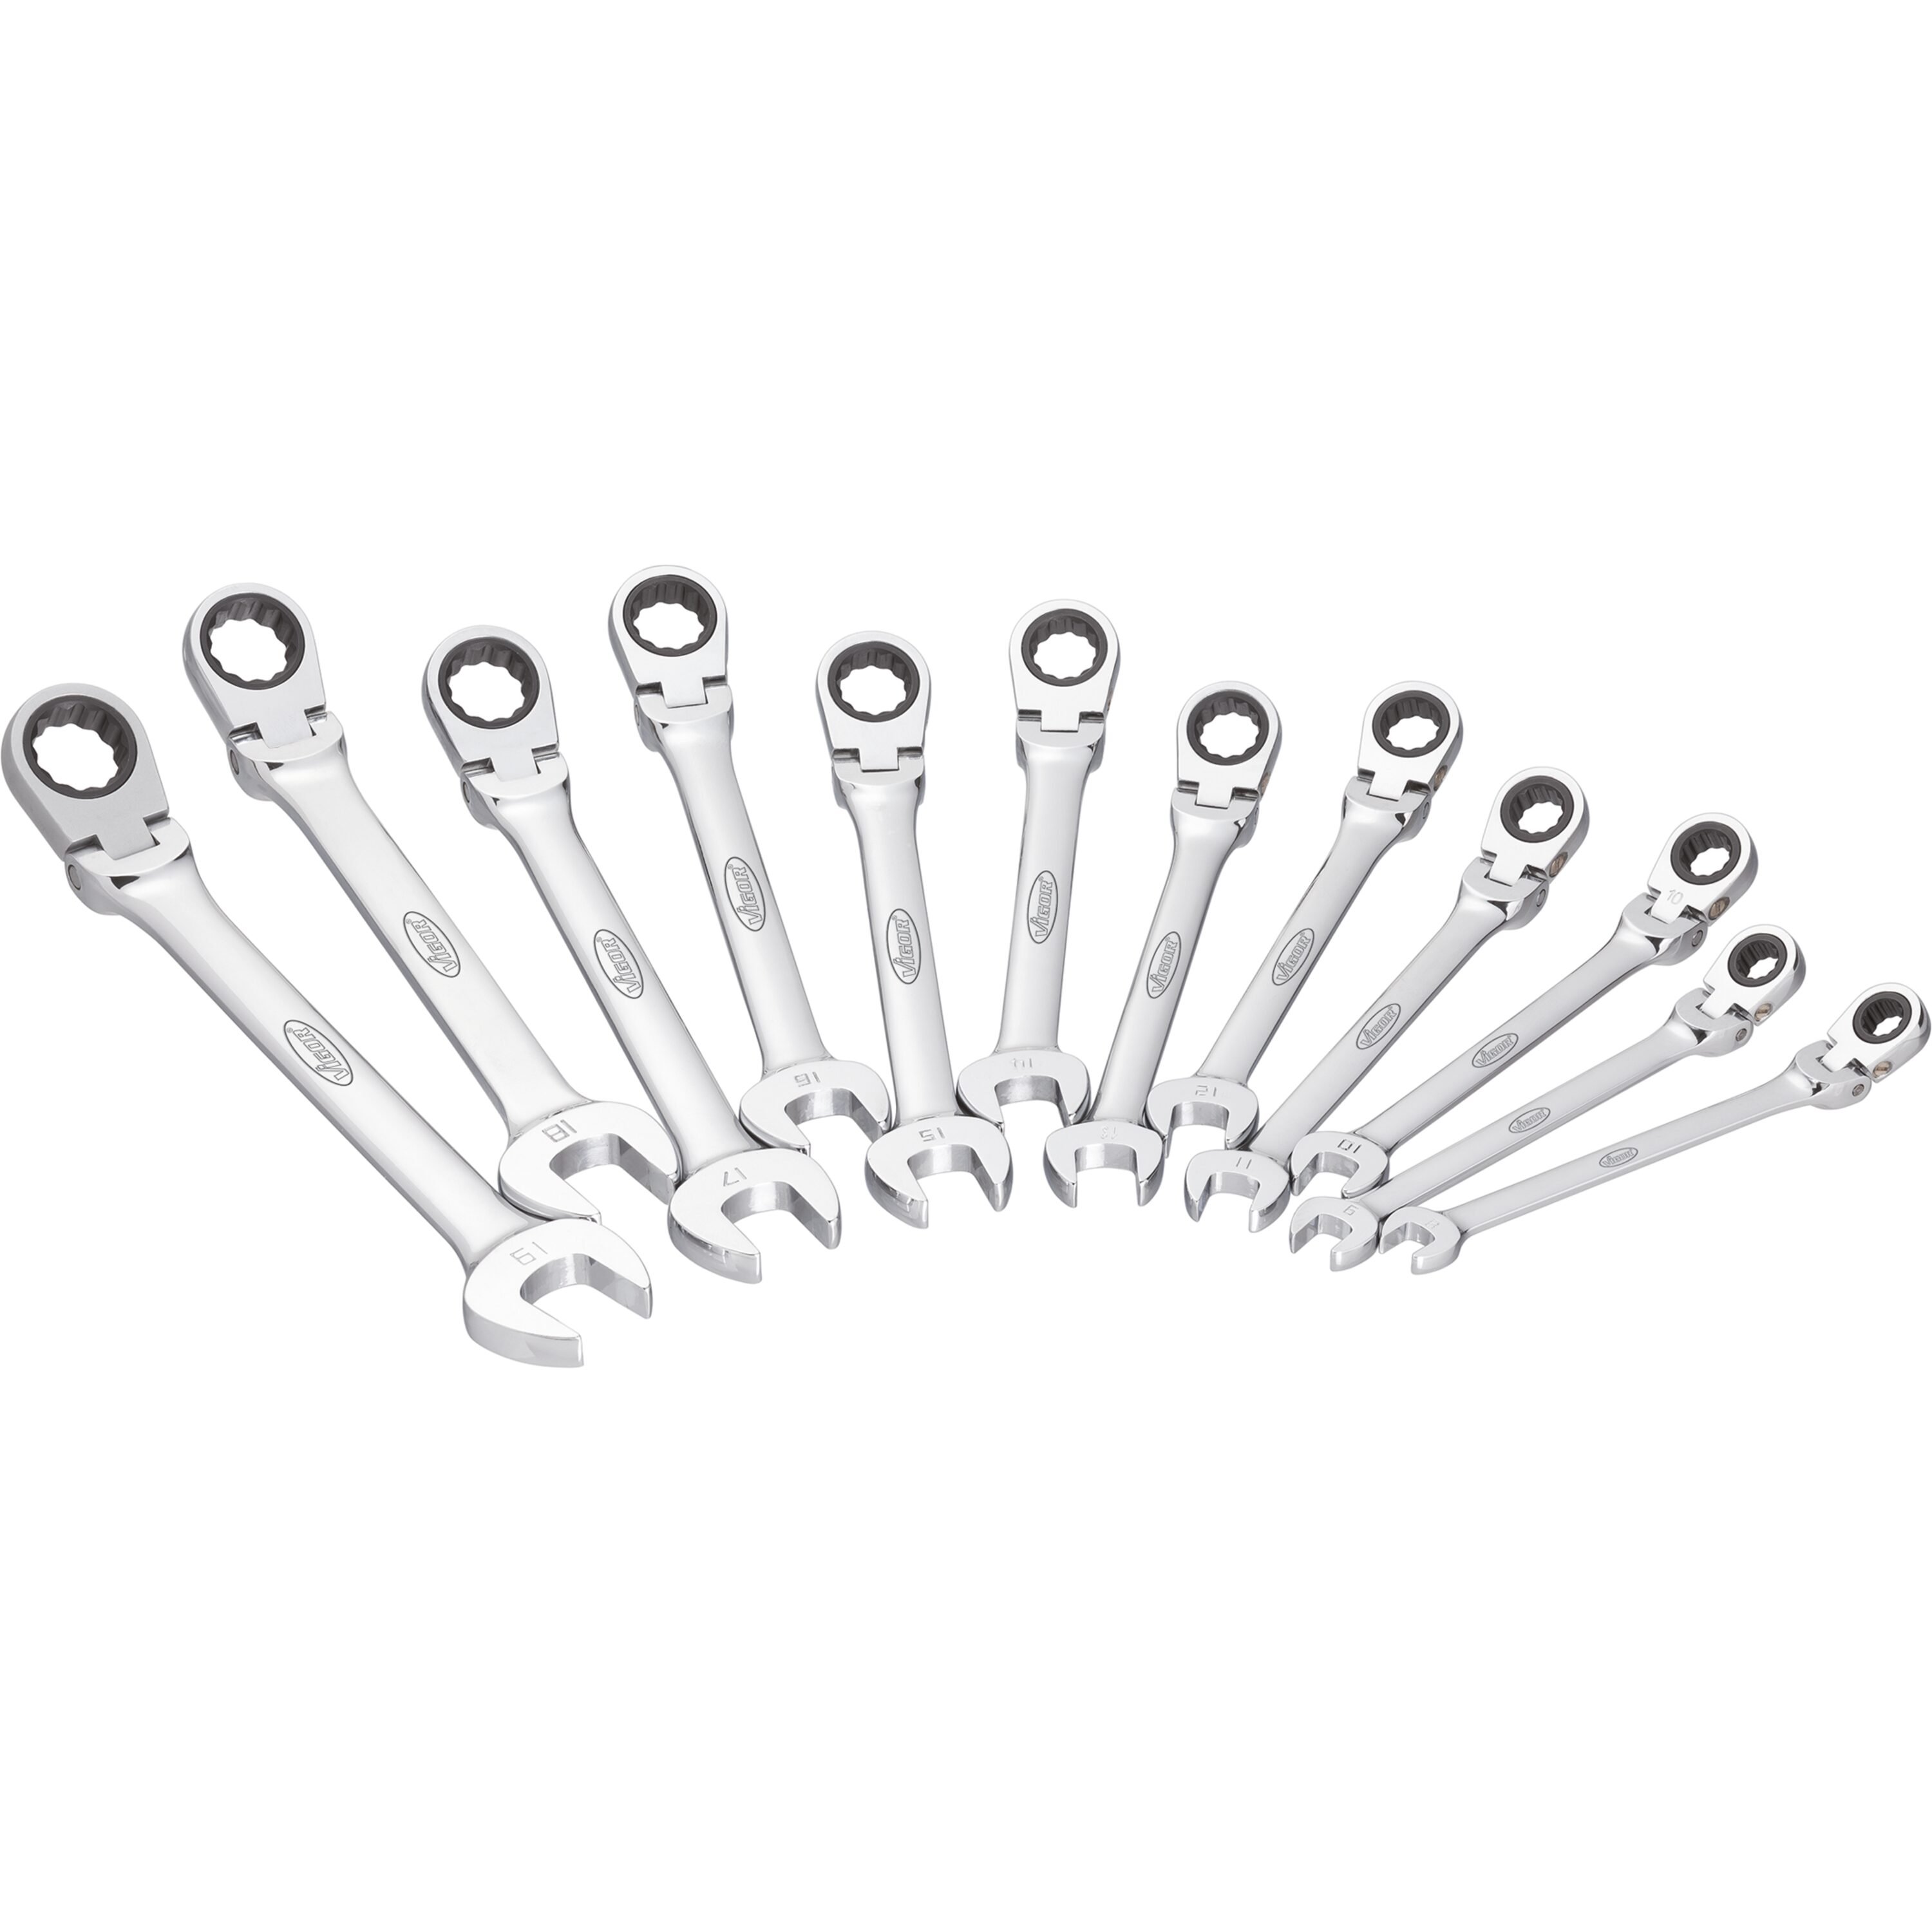 Open-end wrenches, spanners, socket wrenches, etc. Ring spanner, Size: 8 - 19 mm, 12 pcs  Art. V2818